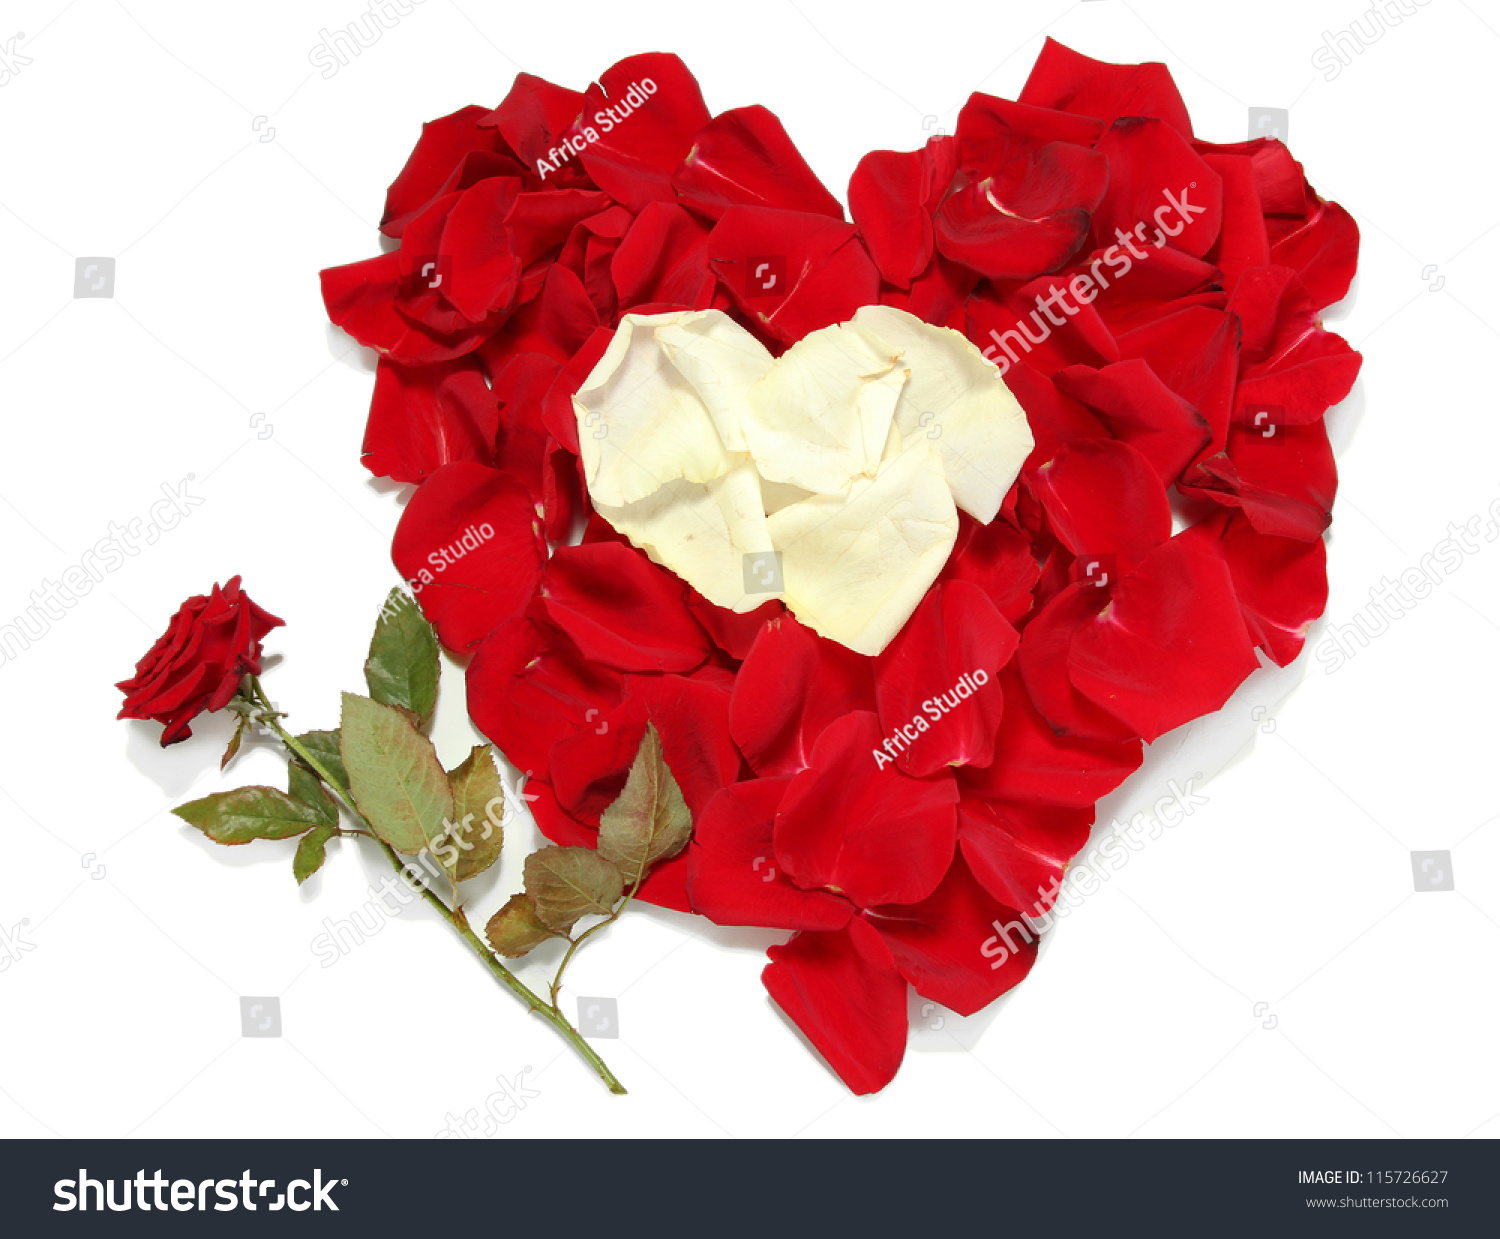 Beautiful Heart Of Red And White Rose Petals With Red Rose Isolated On ...